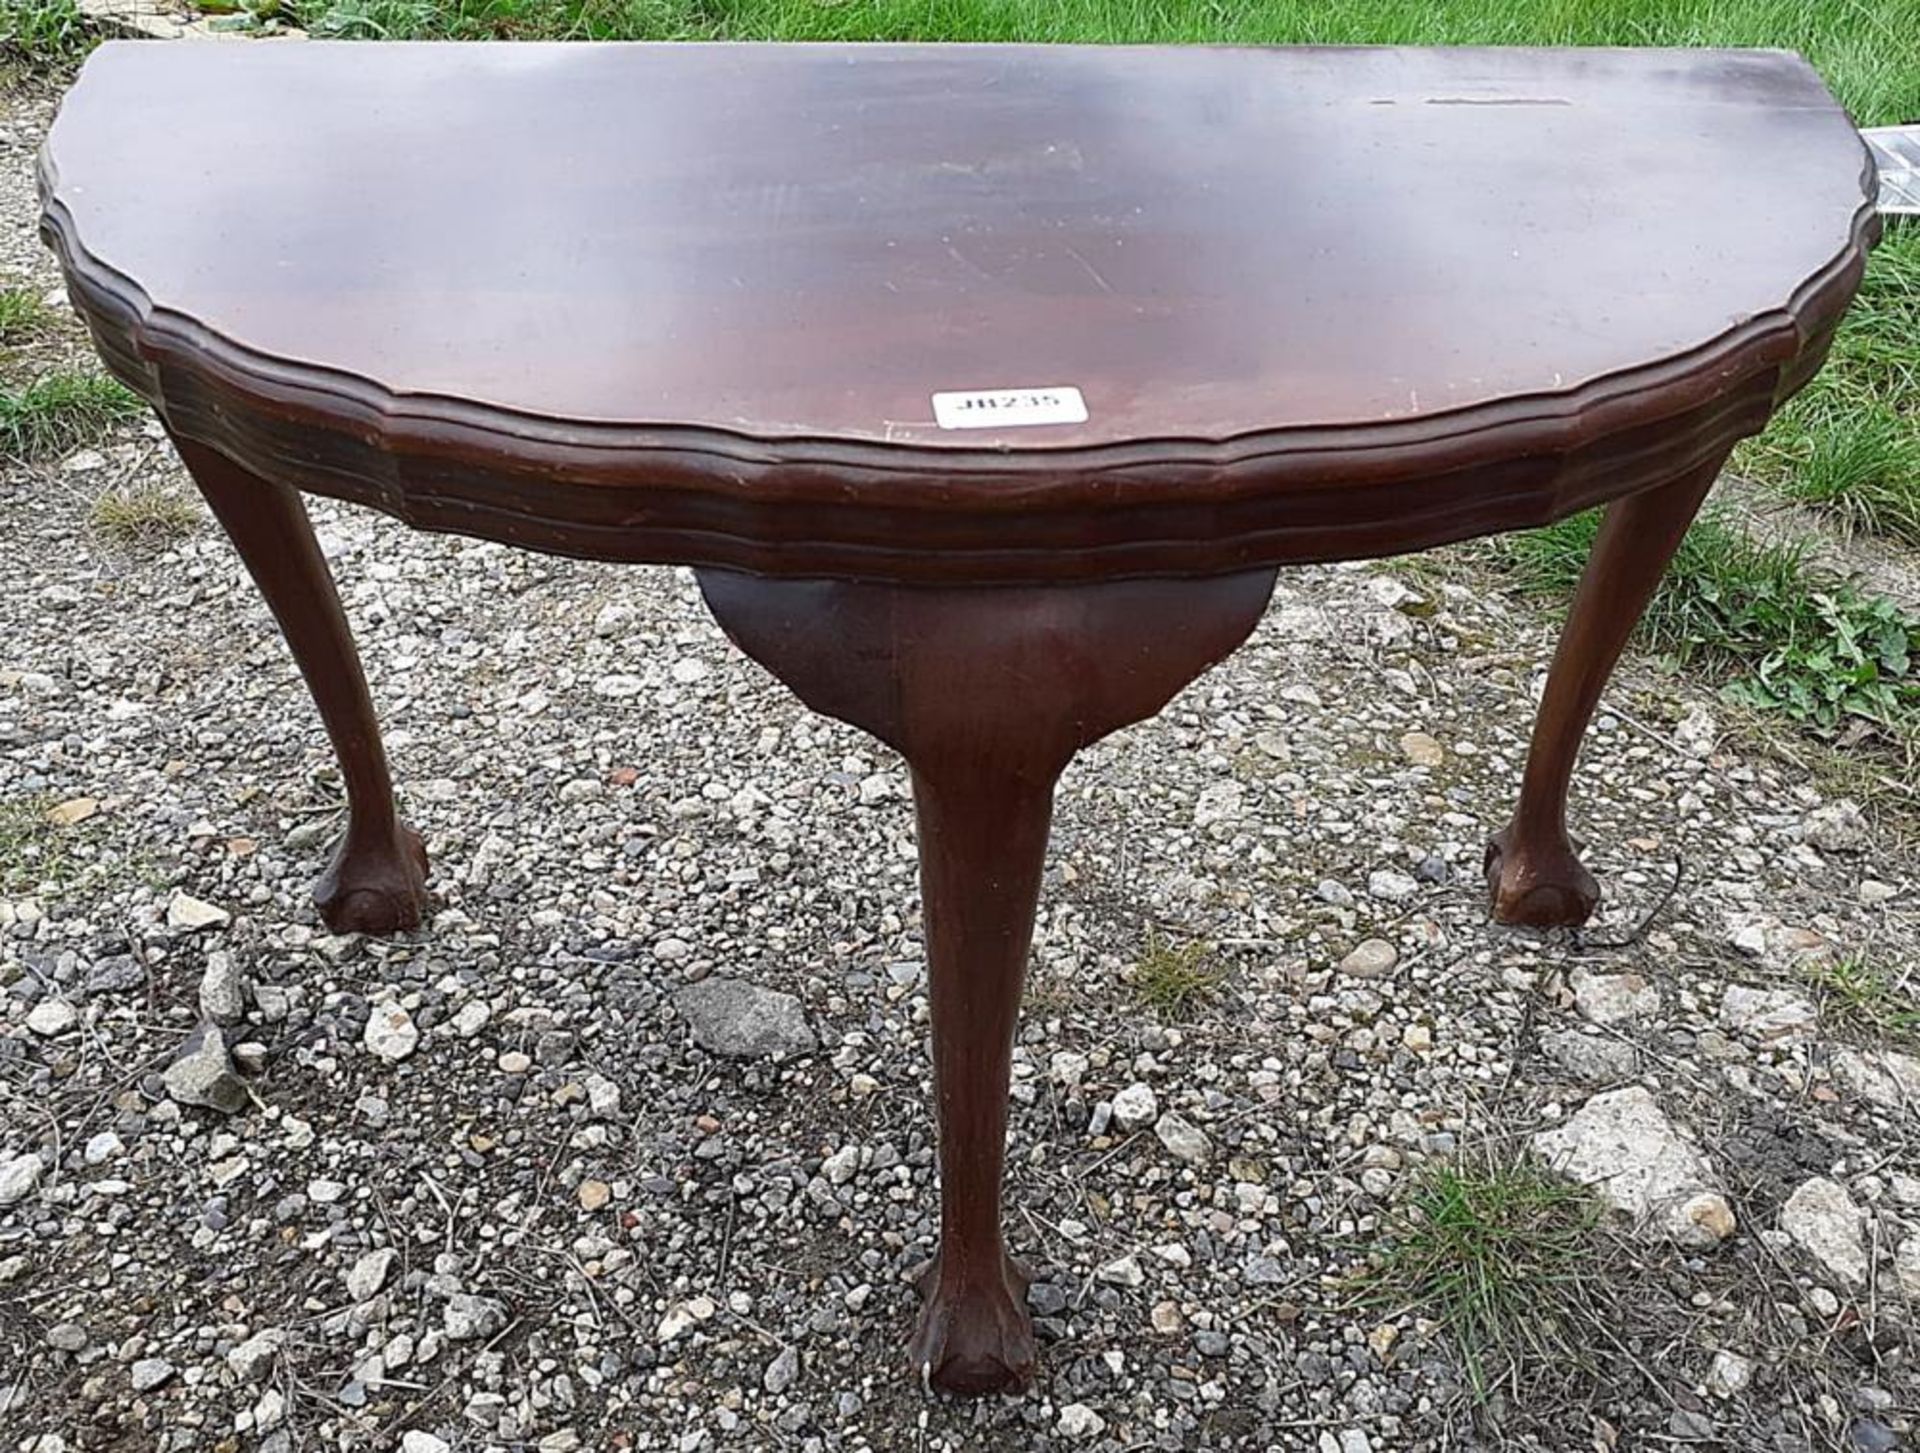 1 x Antique Mahogany Half Moon Hall Table With Ball And Claw Feet - Ref: JB235 - Pre-Owned - NO